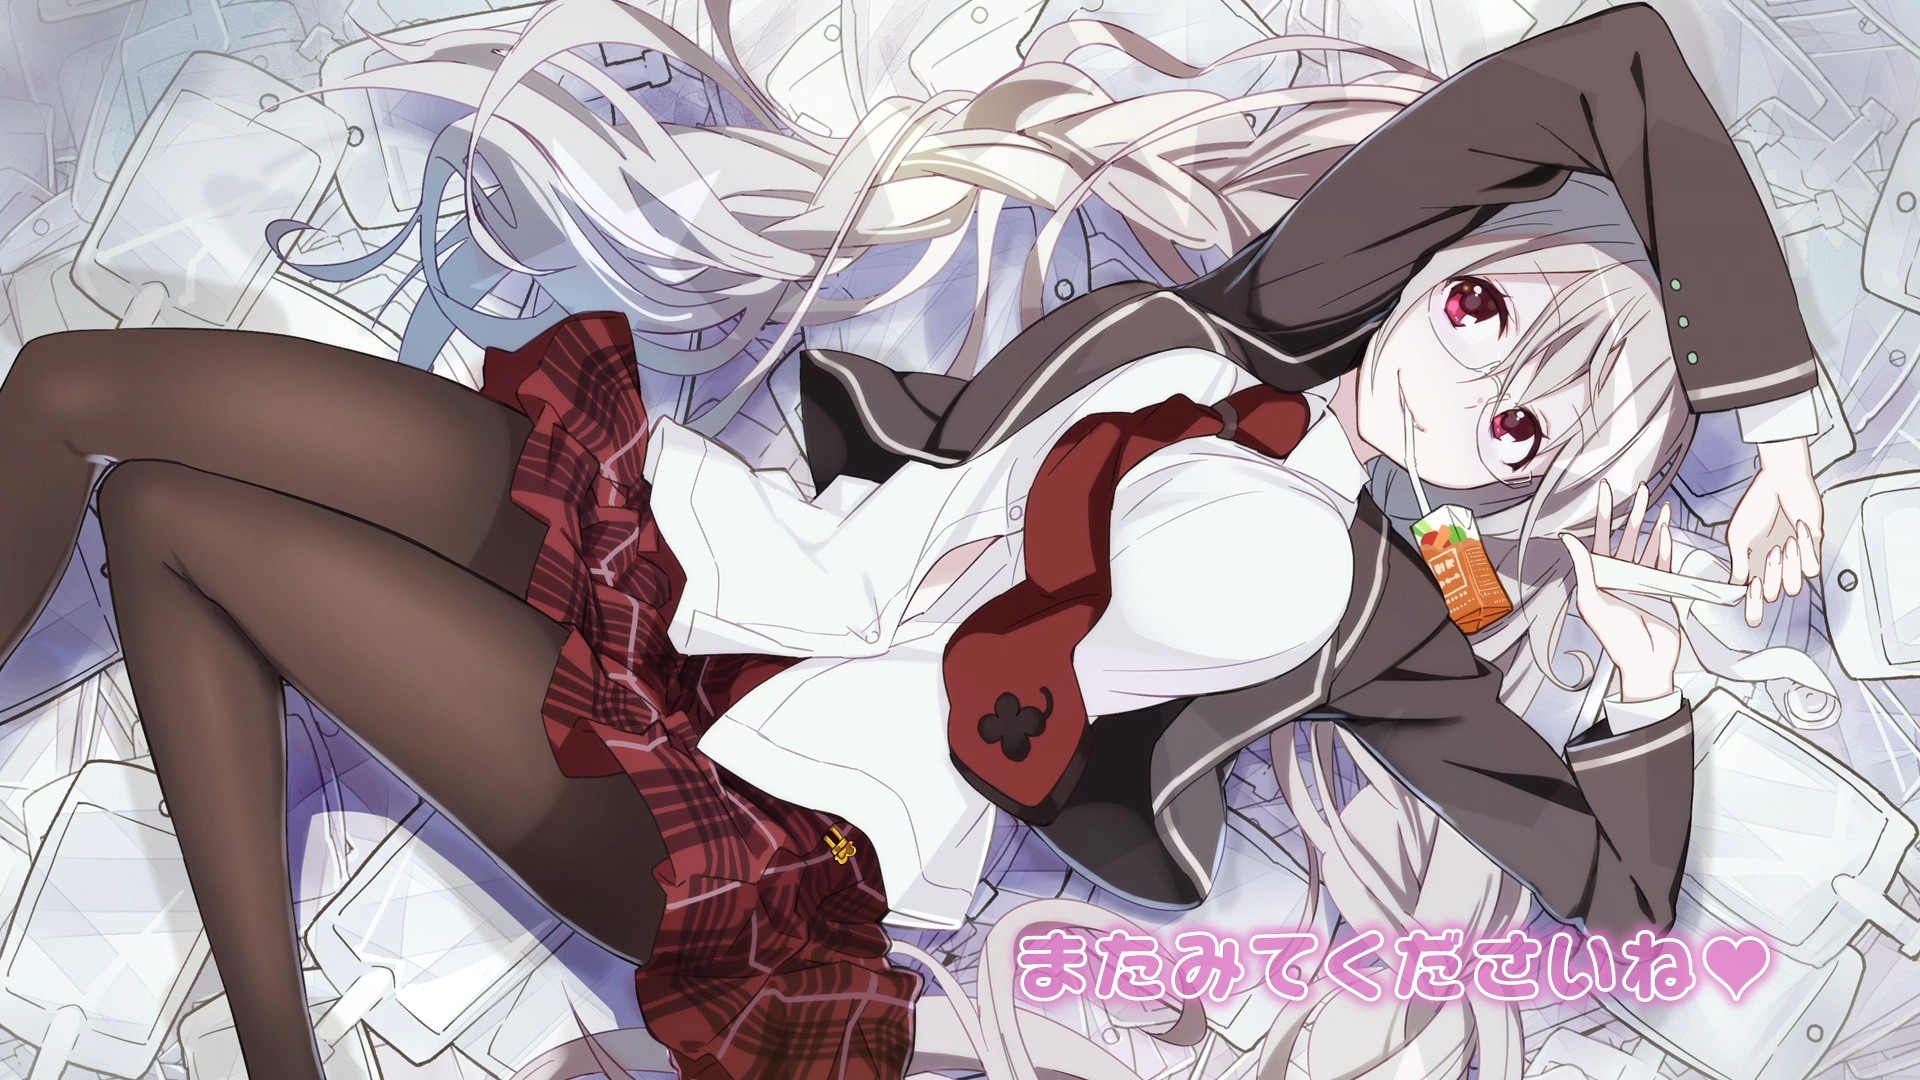 Anime 1920x1080 anime anime girls skirt long hair white hair Anne Happy pantyhose black pantyhose thighs legs tie women with glasses lying on back food drink blouses red skirt plaid clothing plaid skirt